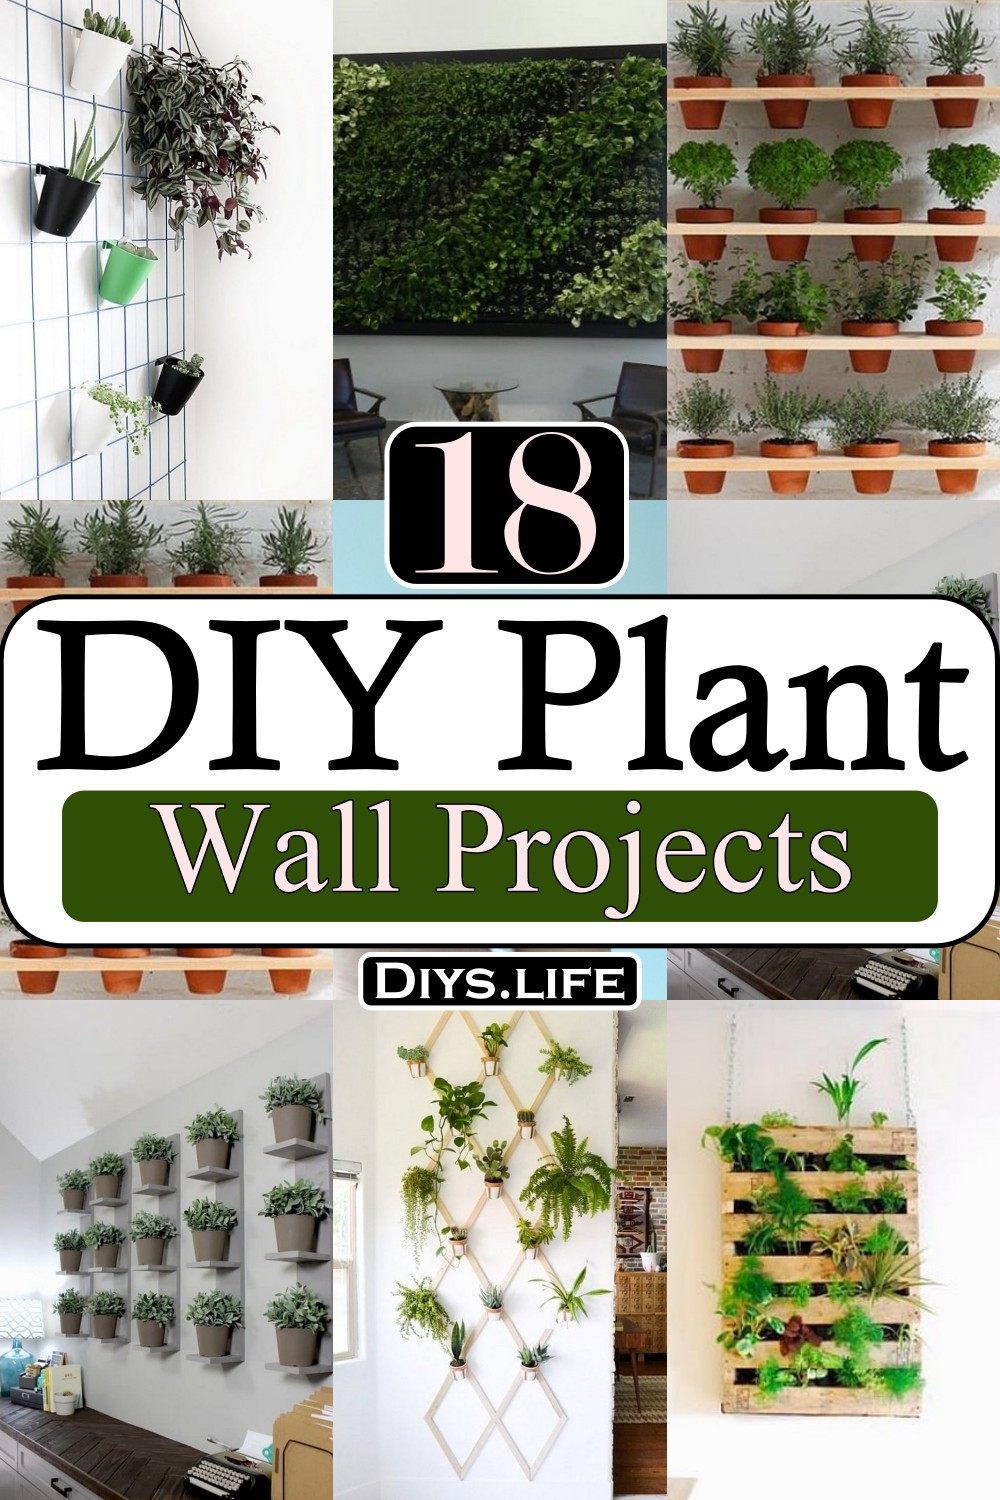 DIY Plant Wall Projects 